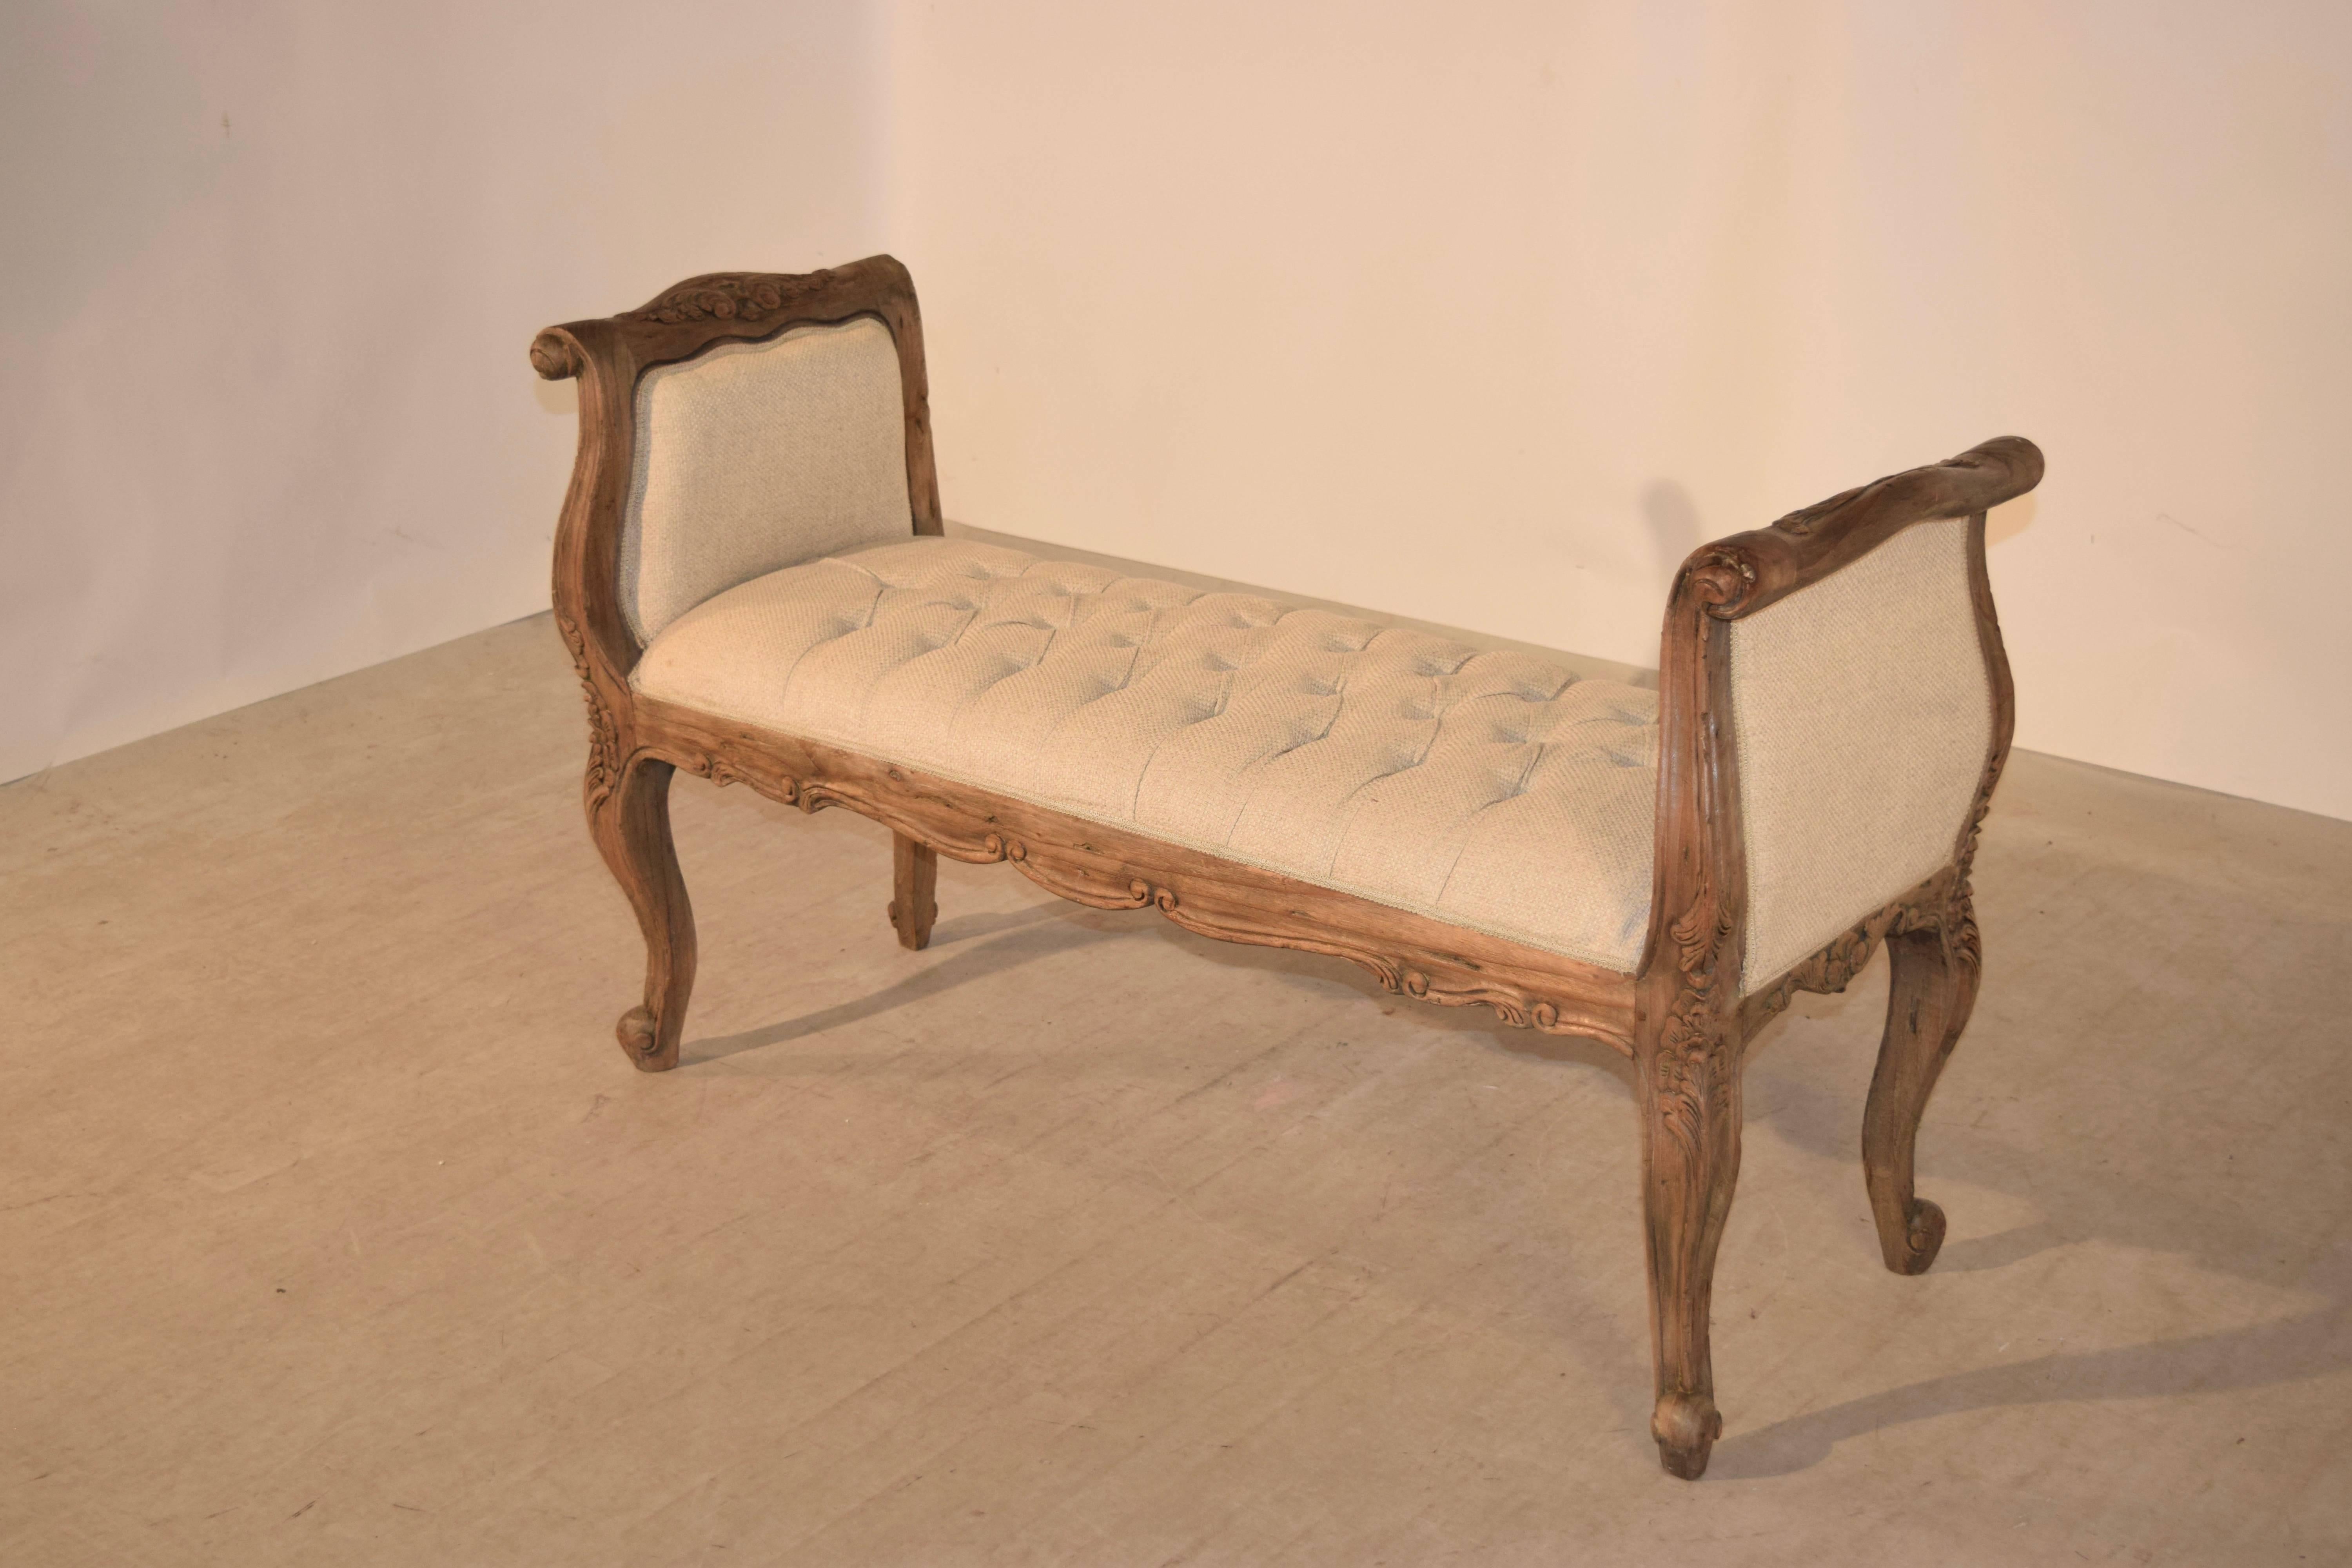 Bleached oak French upholstered bench with a wonderfully hand-carved and shaped frame which has been meticulously upholstered in a chesterfield pattern in linen.